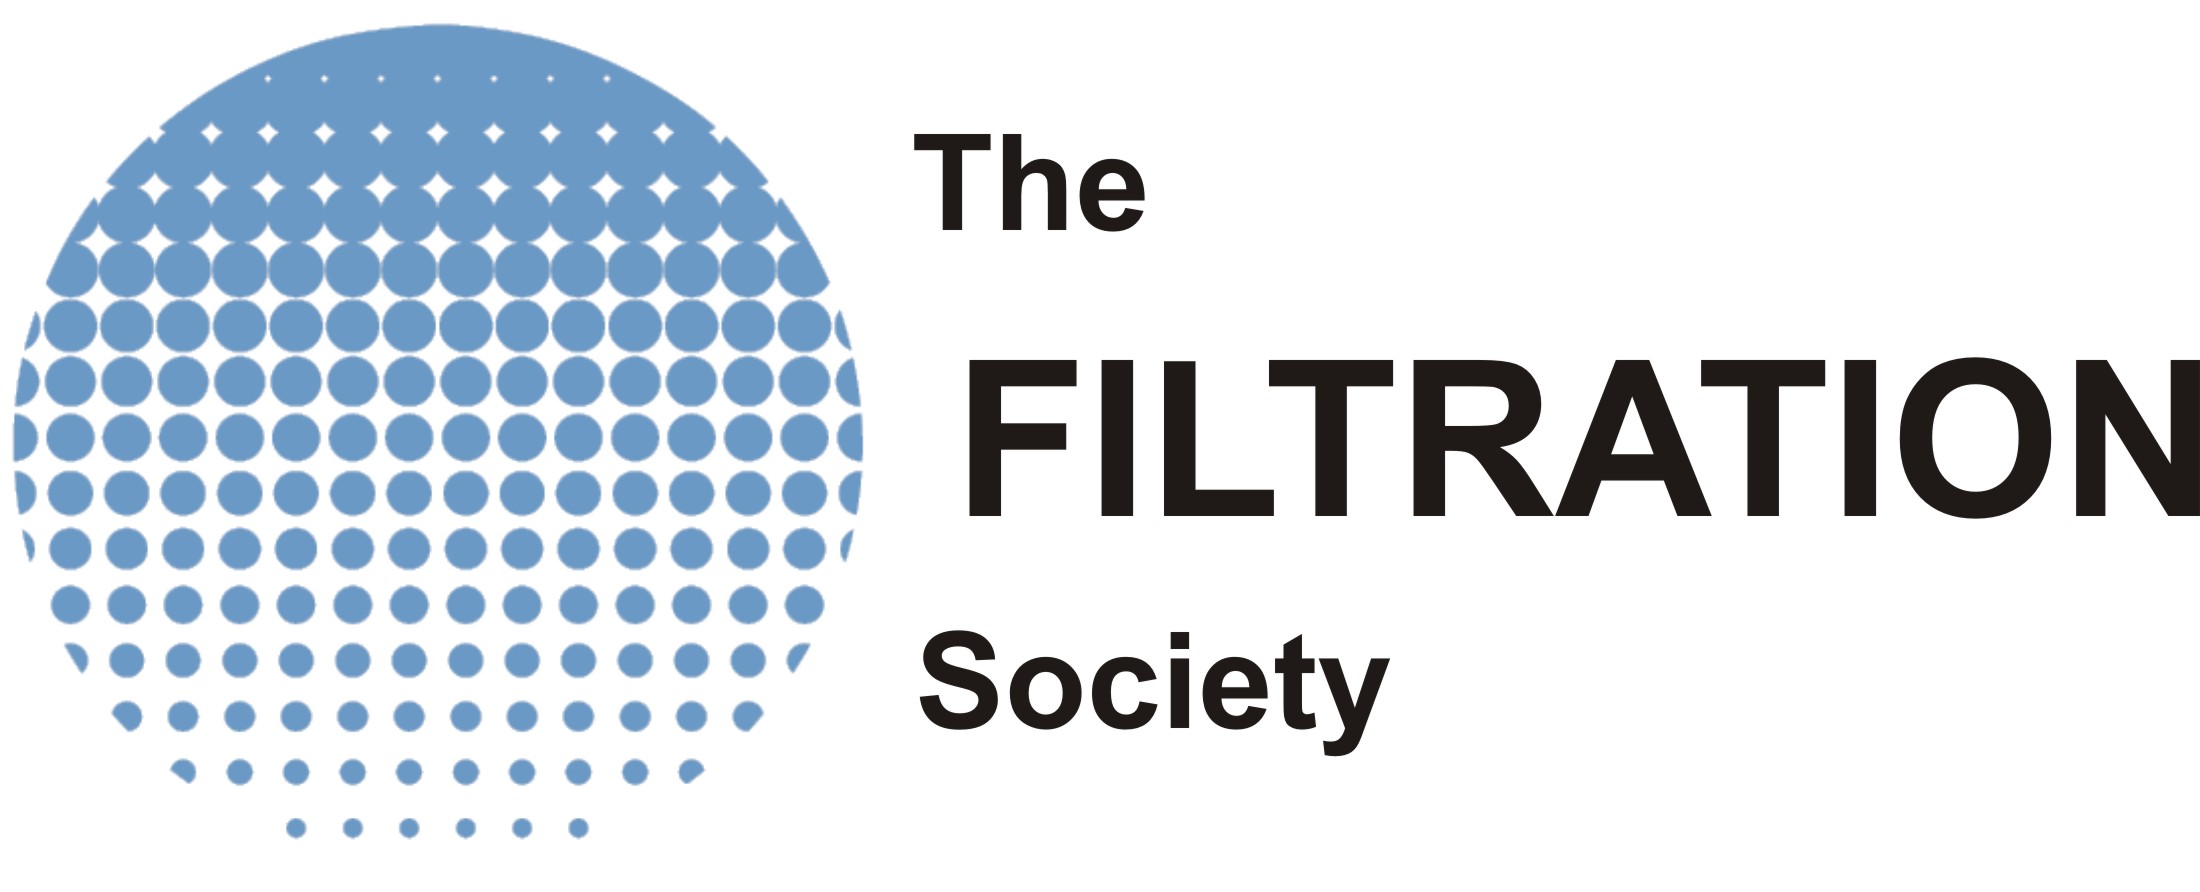 logo for Filtration Society, The